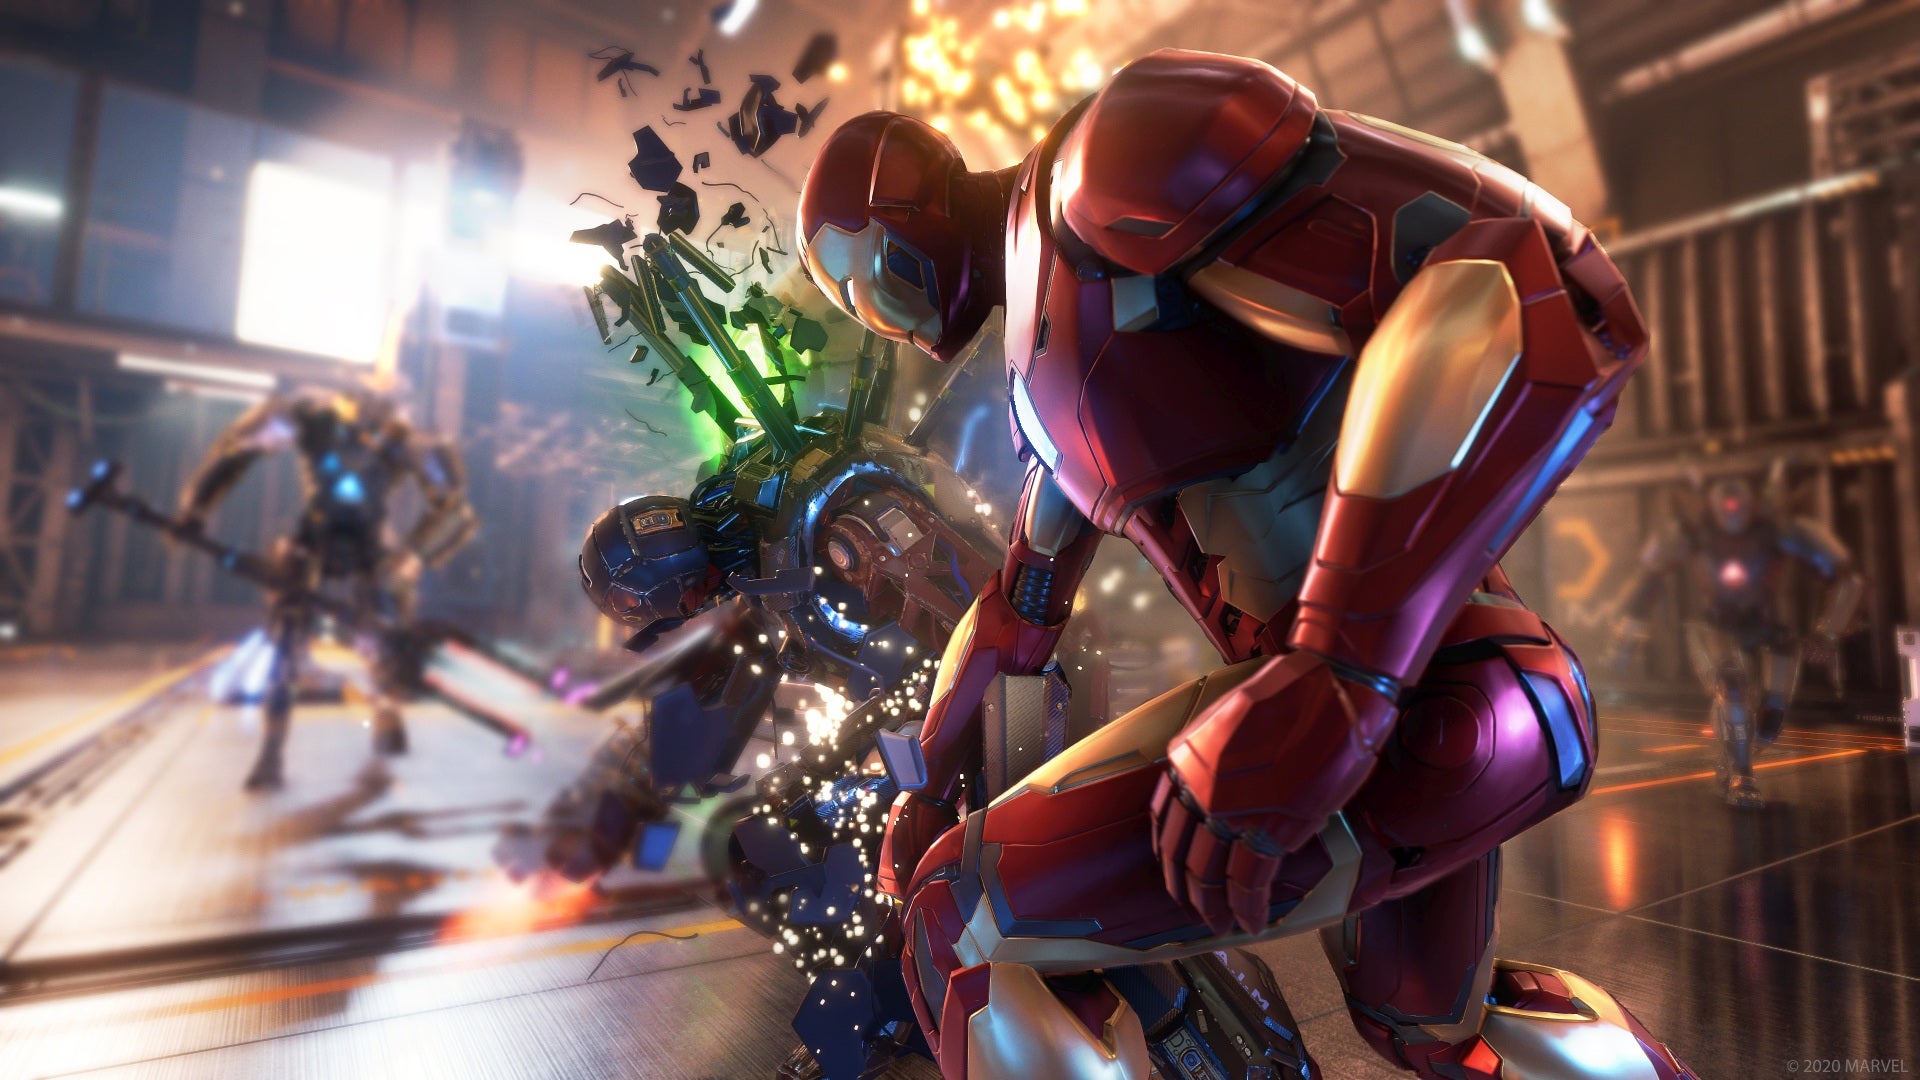 Image for Marvel's Avengers Devs Talk About a "Whole Ecosystem" of Endgame Content